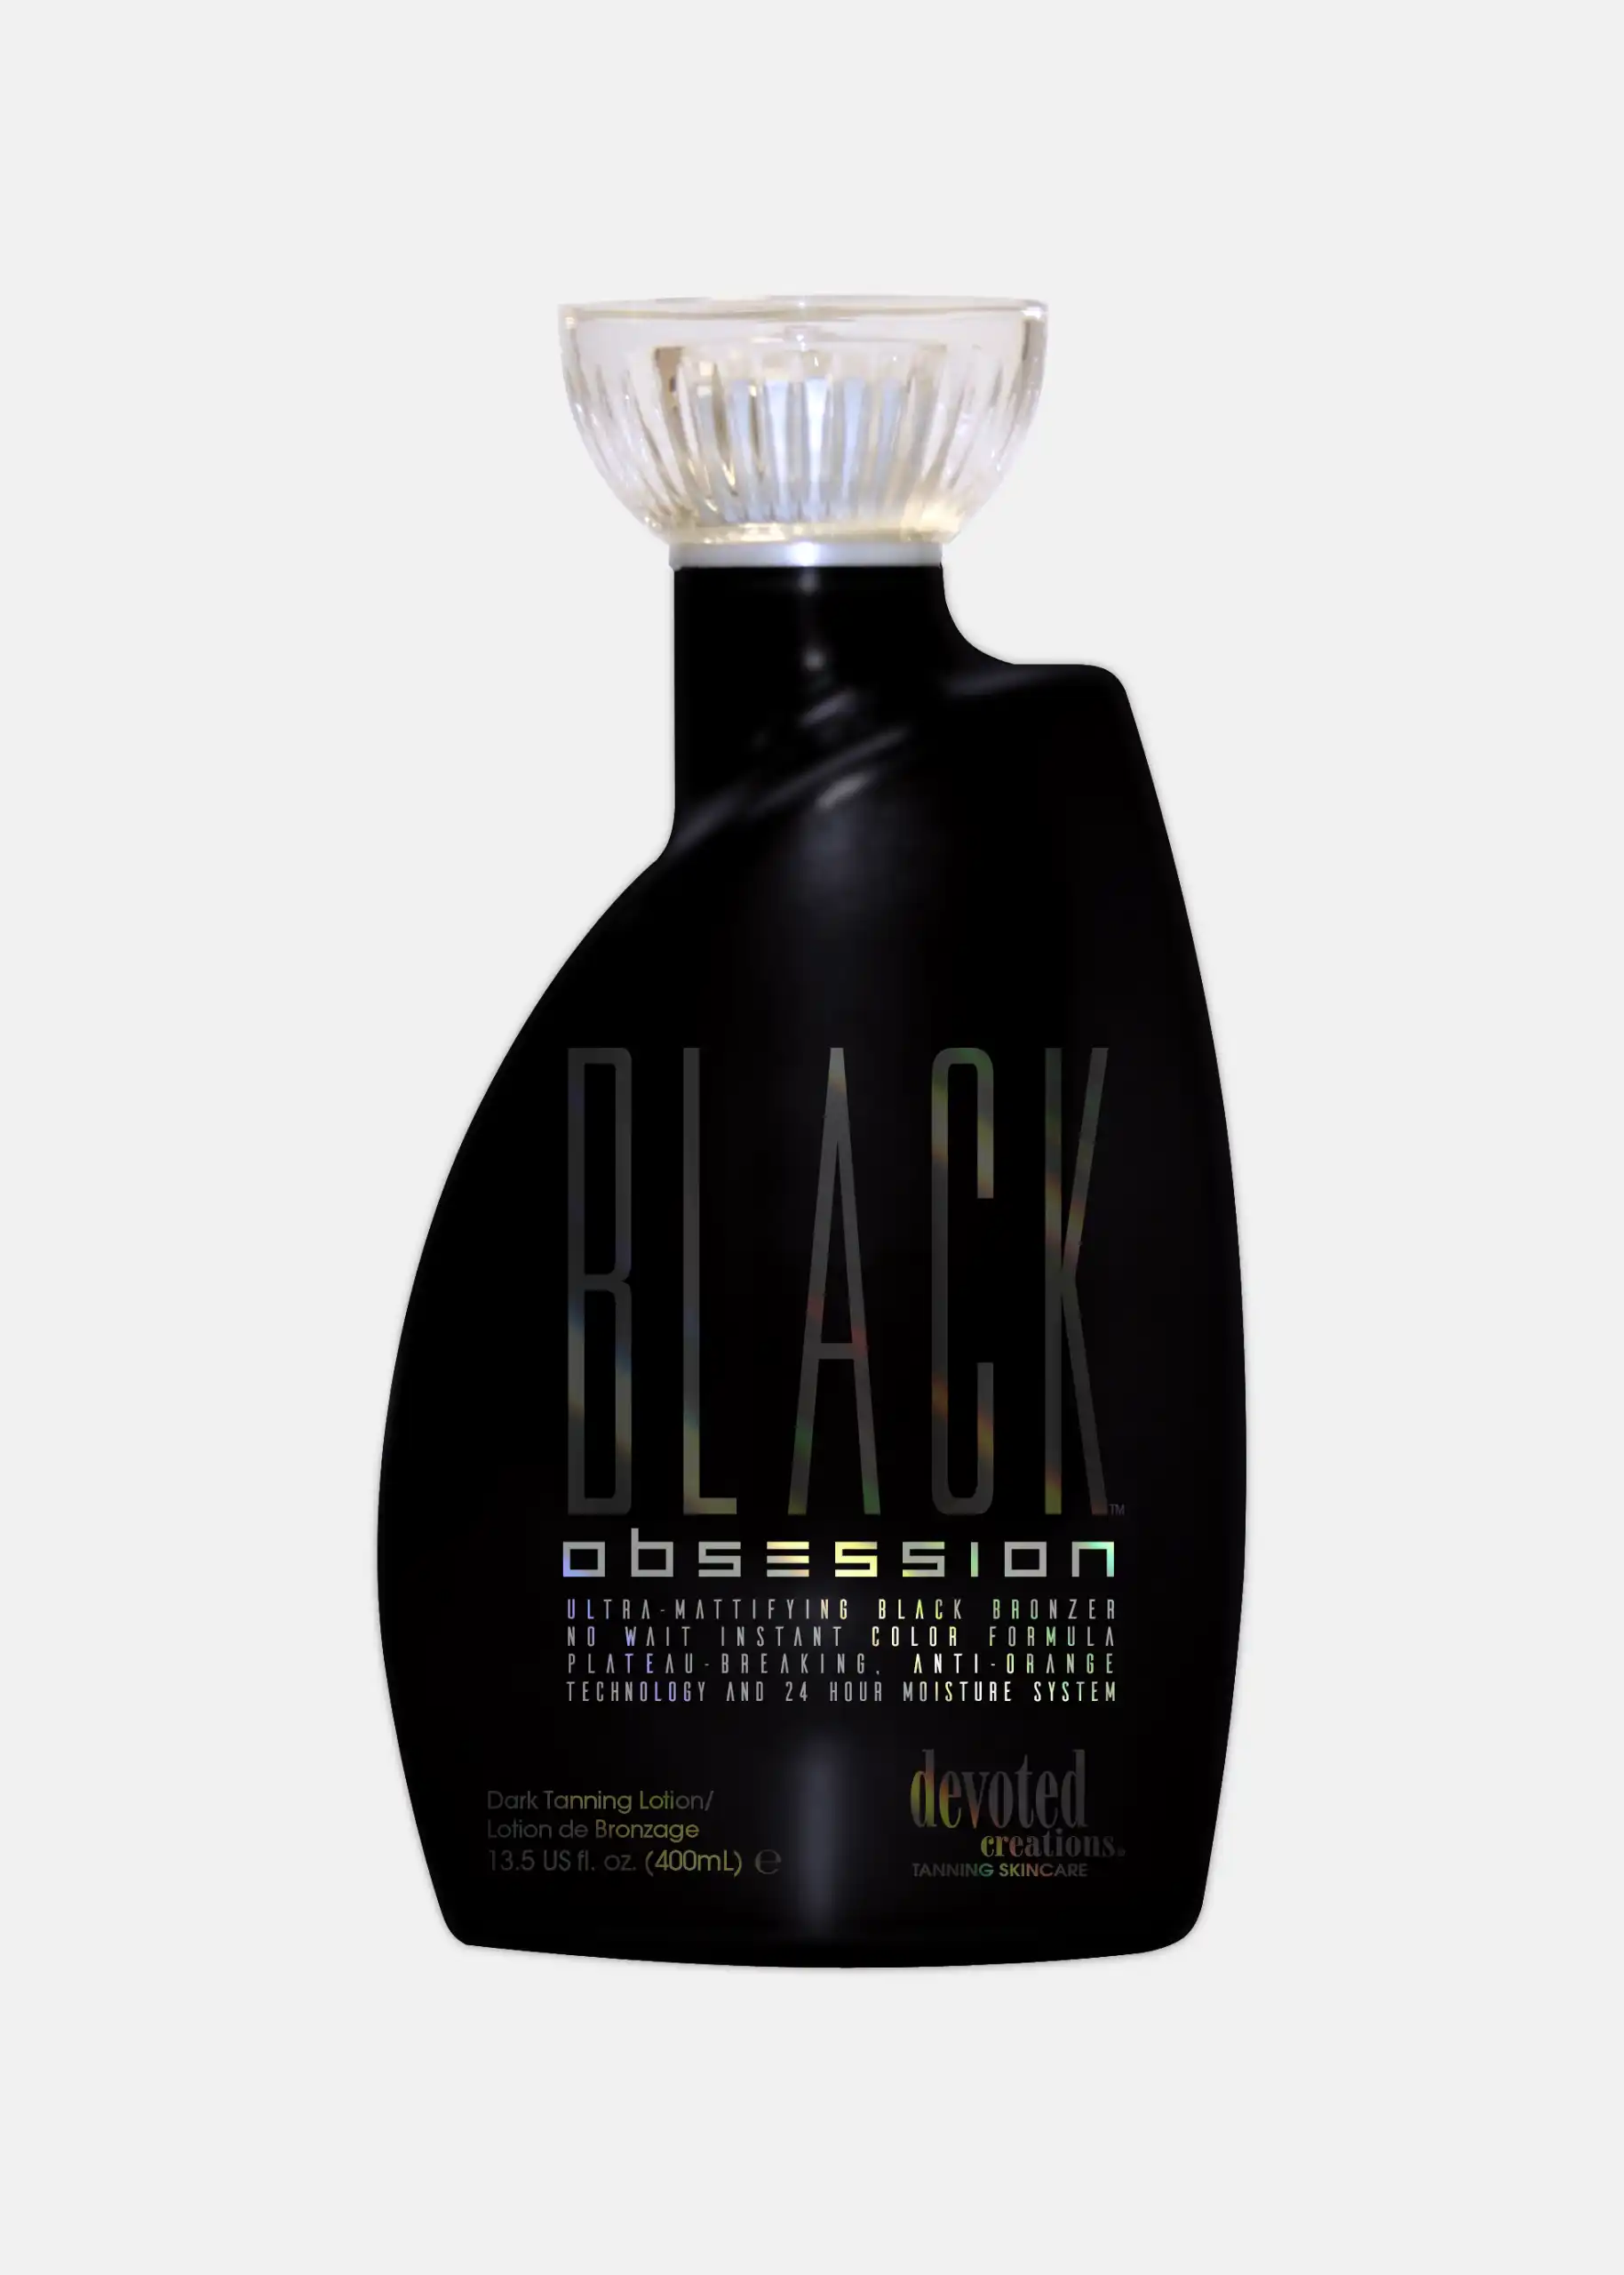 Black Obsession flacone Devoted Creations